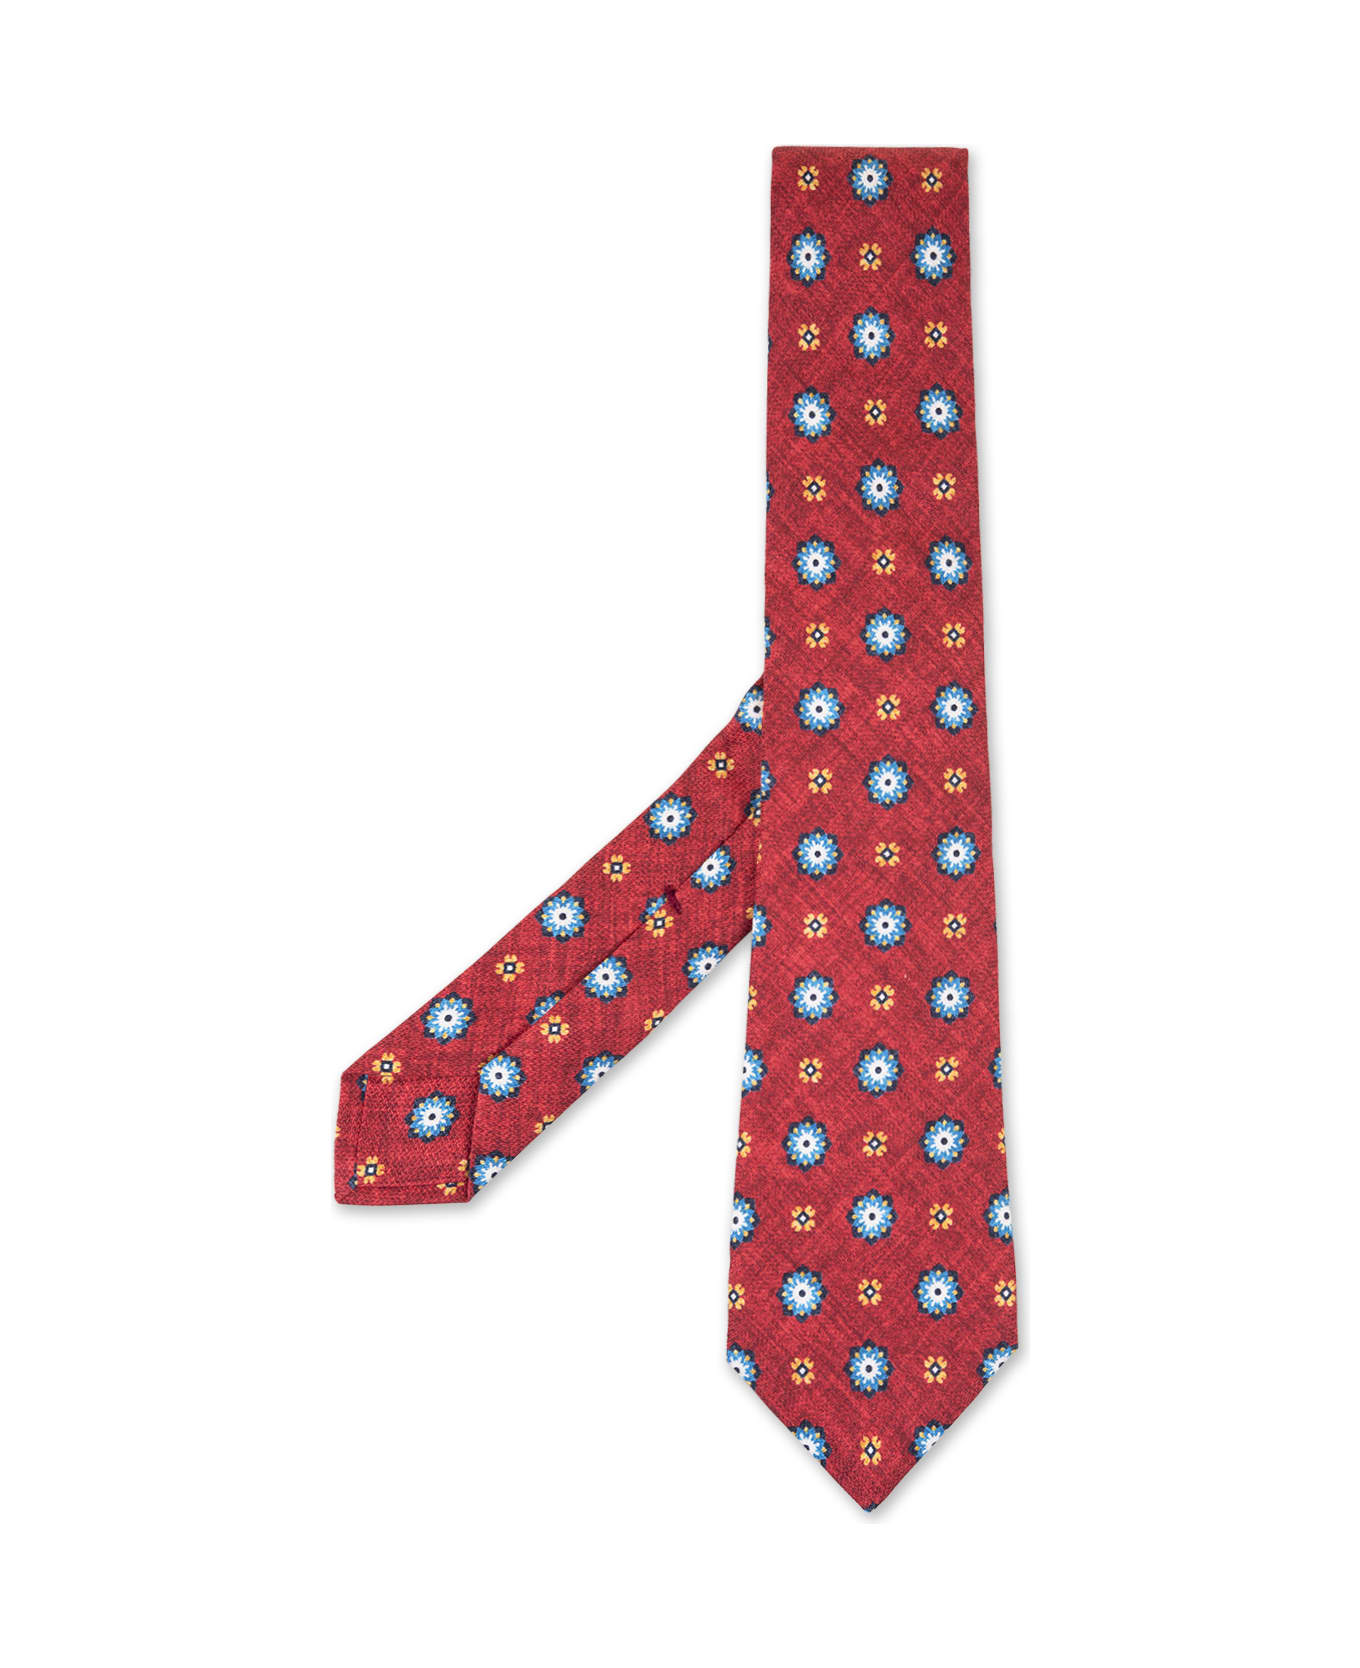 Kiton Red Tie With Flower Pattern - Red